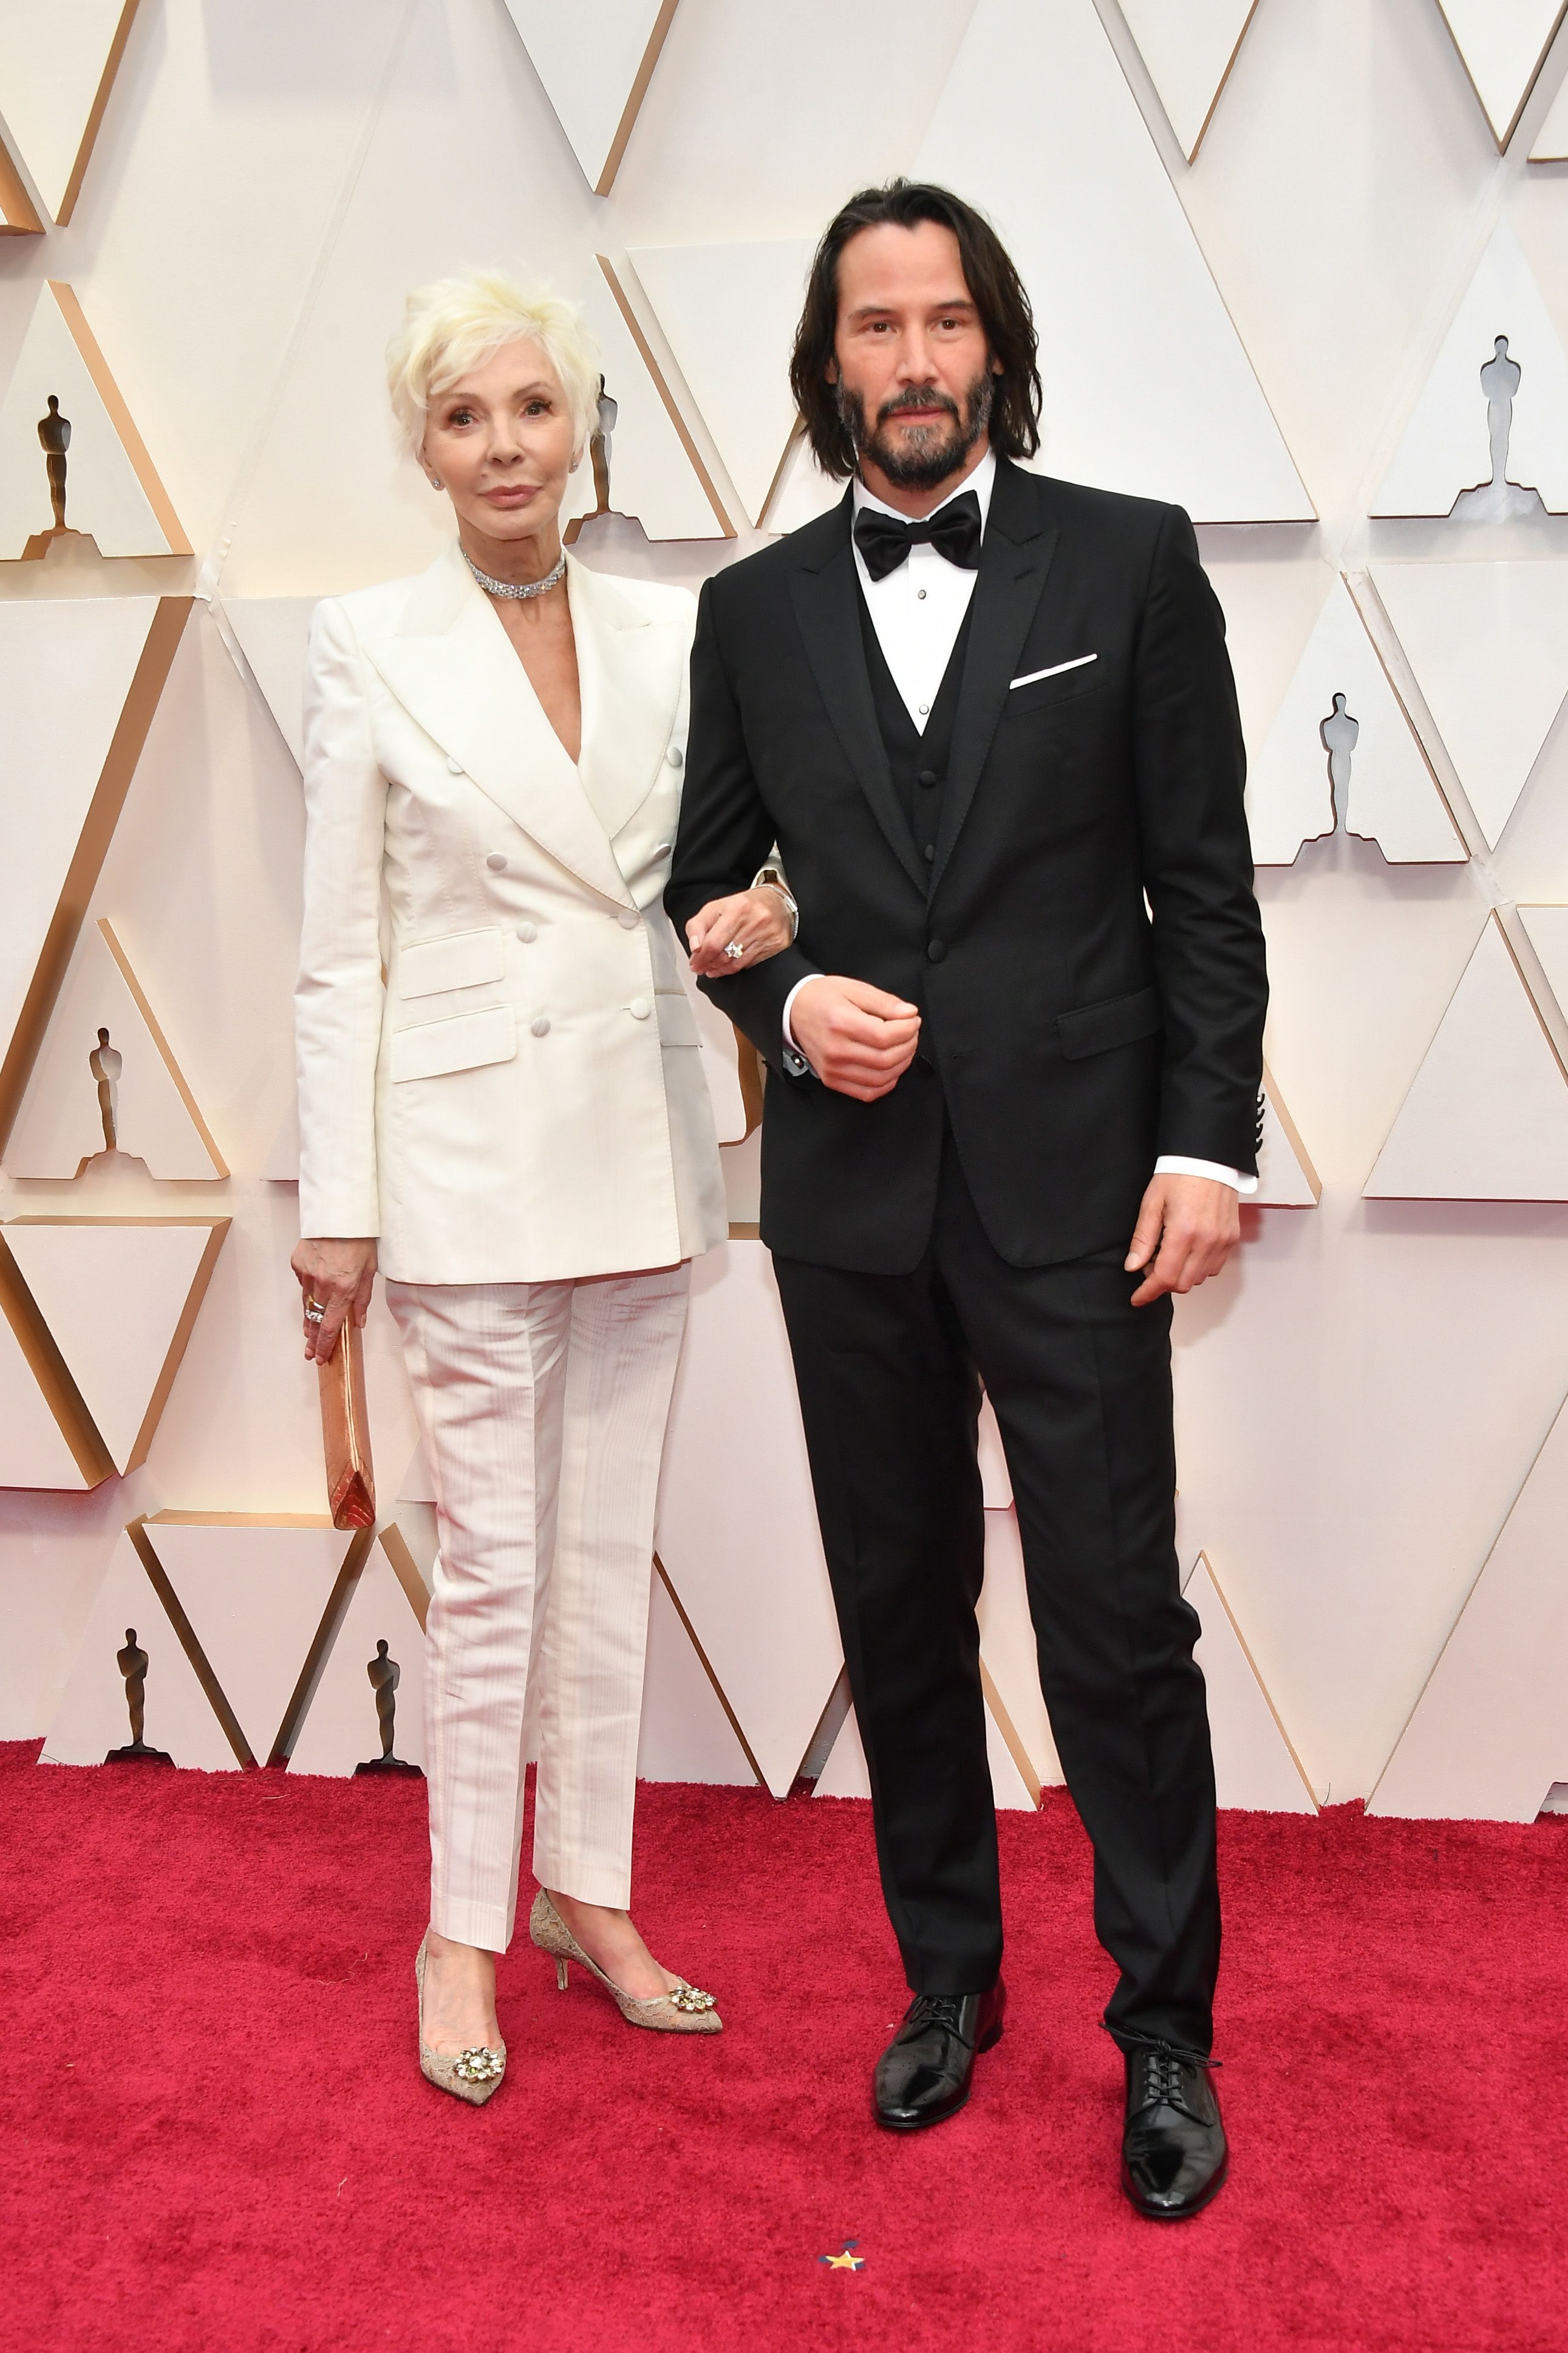 Keanu Reeves bei den Oscars 2020 mit seiner Mutter Patricia Taylor in Hollywood | Quelle: Getty Images